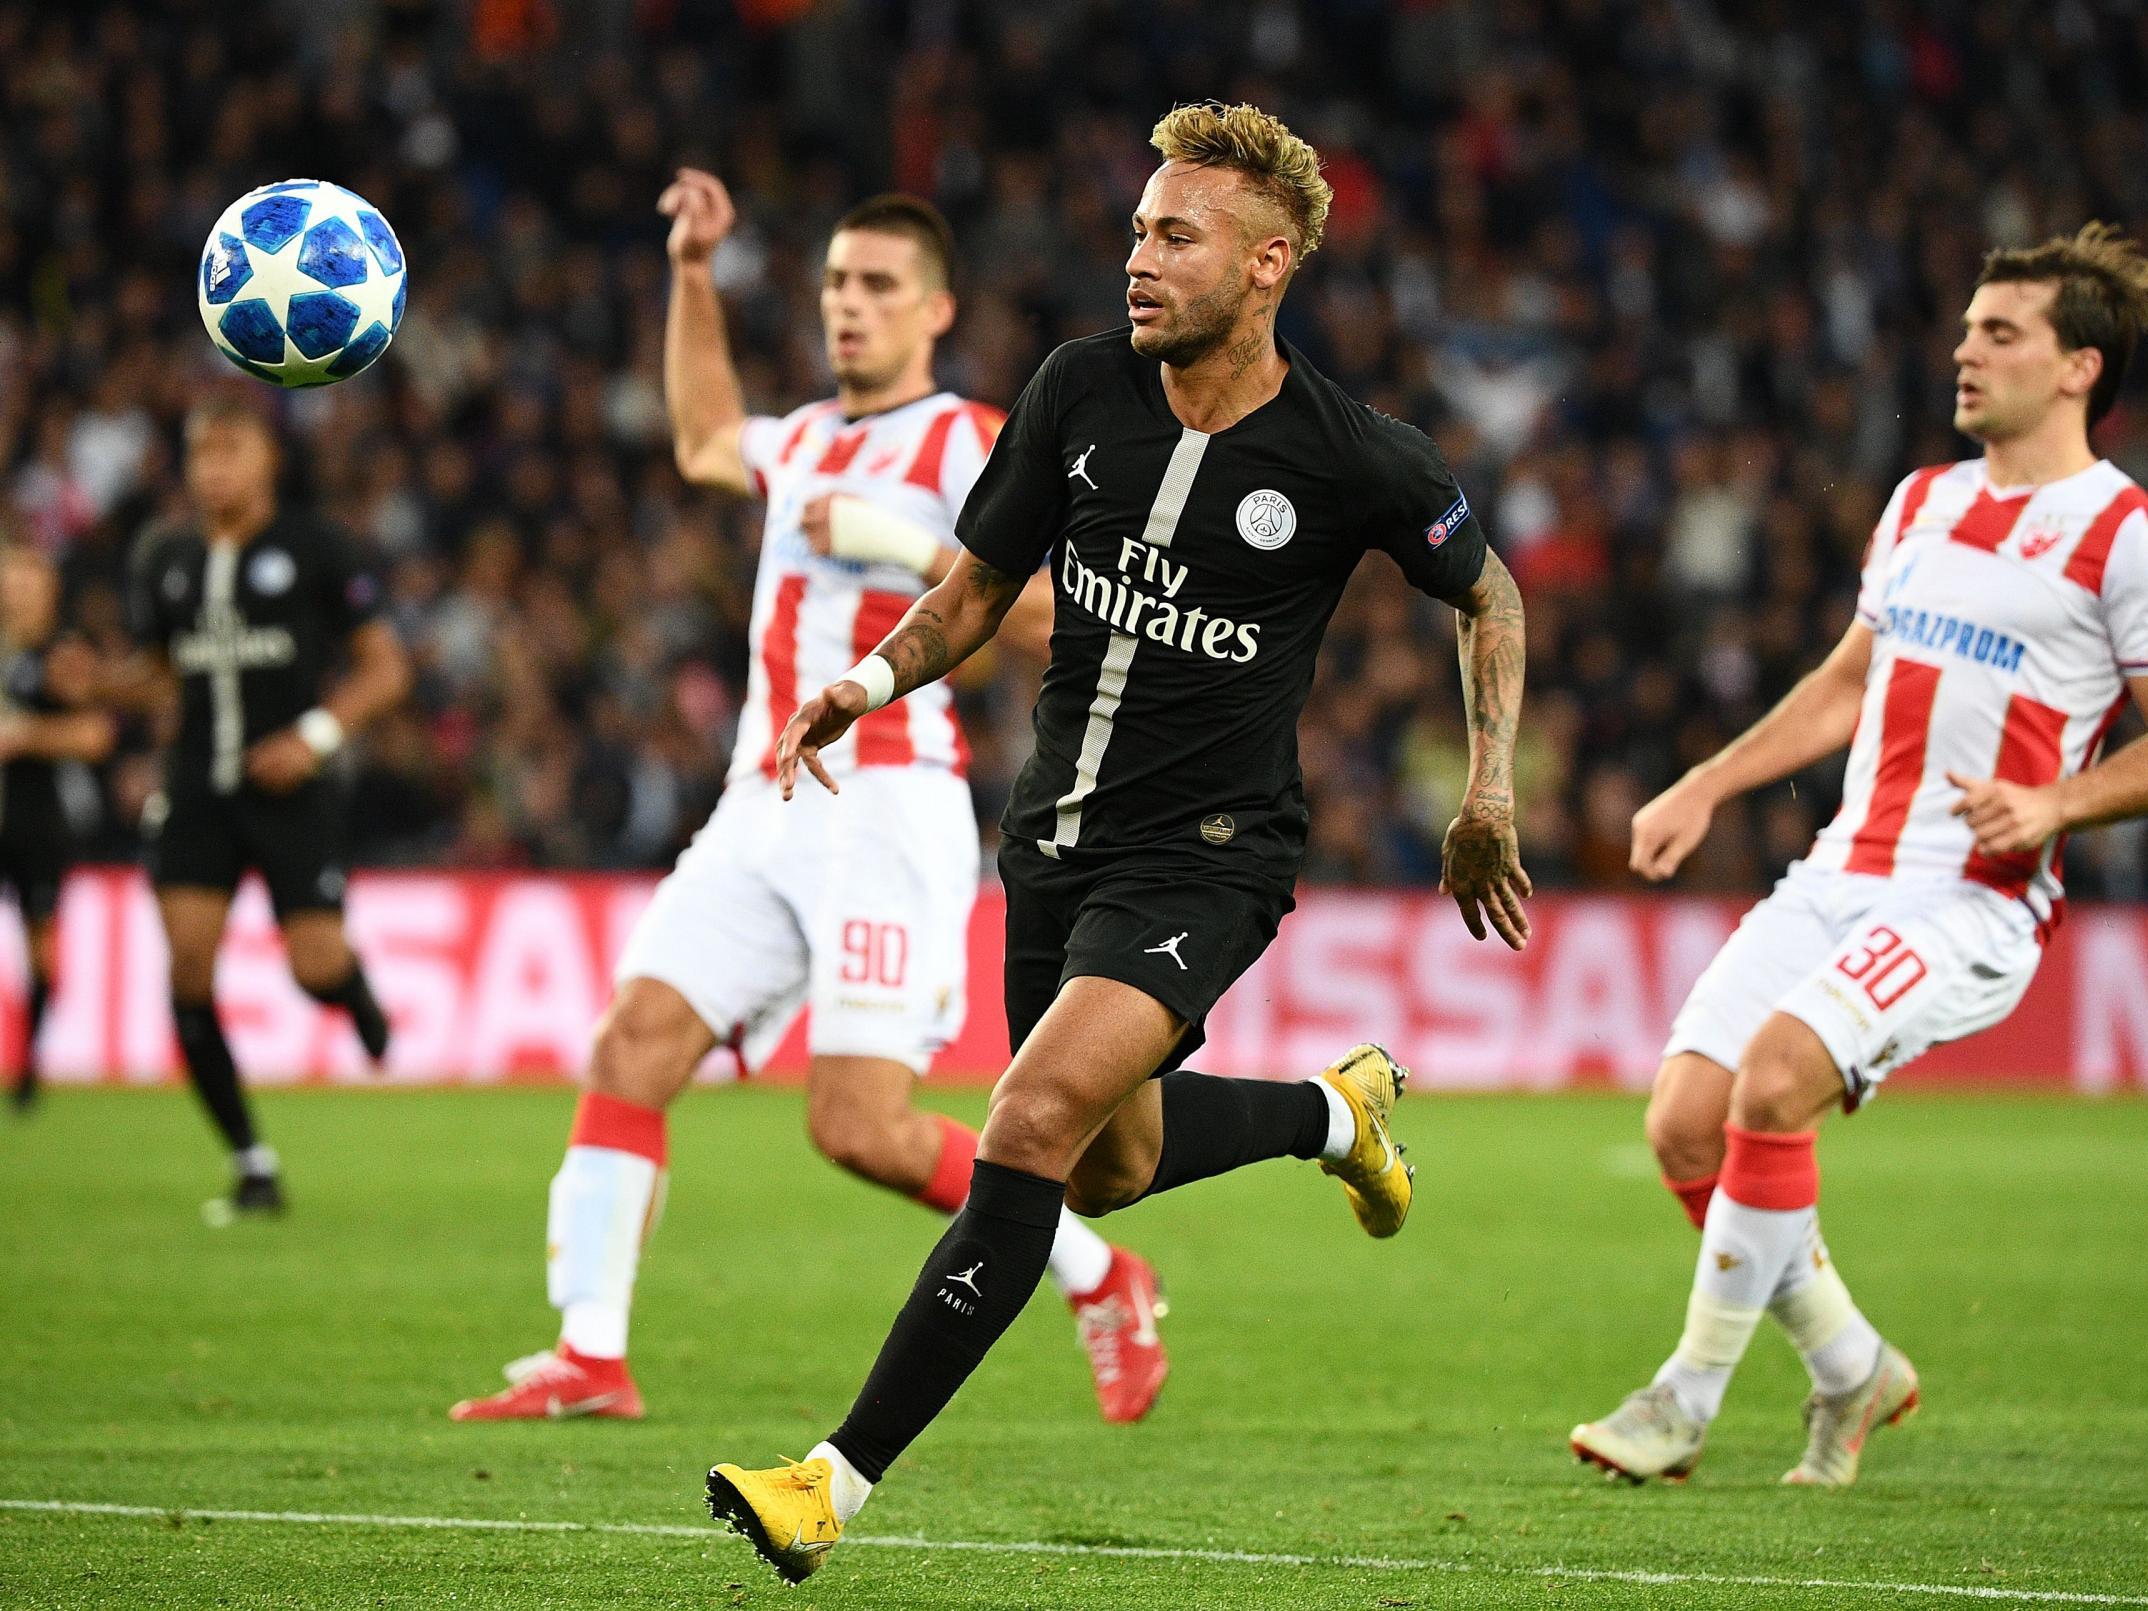 PSG thumped their Serbian opponents 6-1 in the Champions League